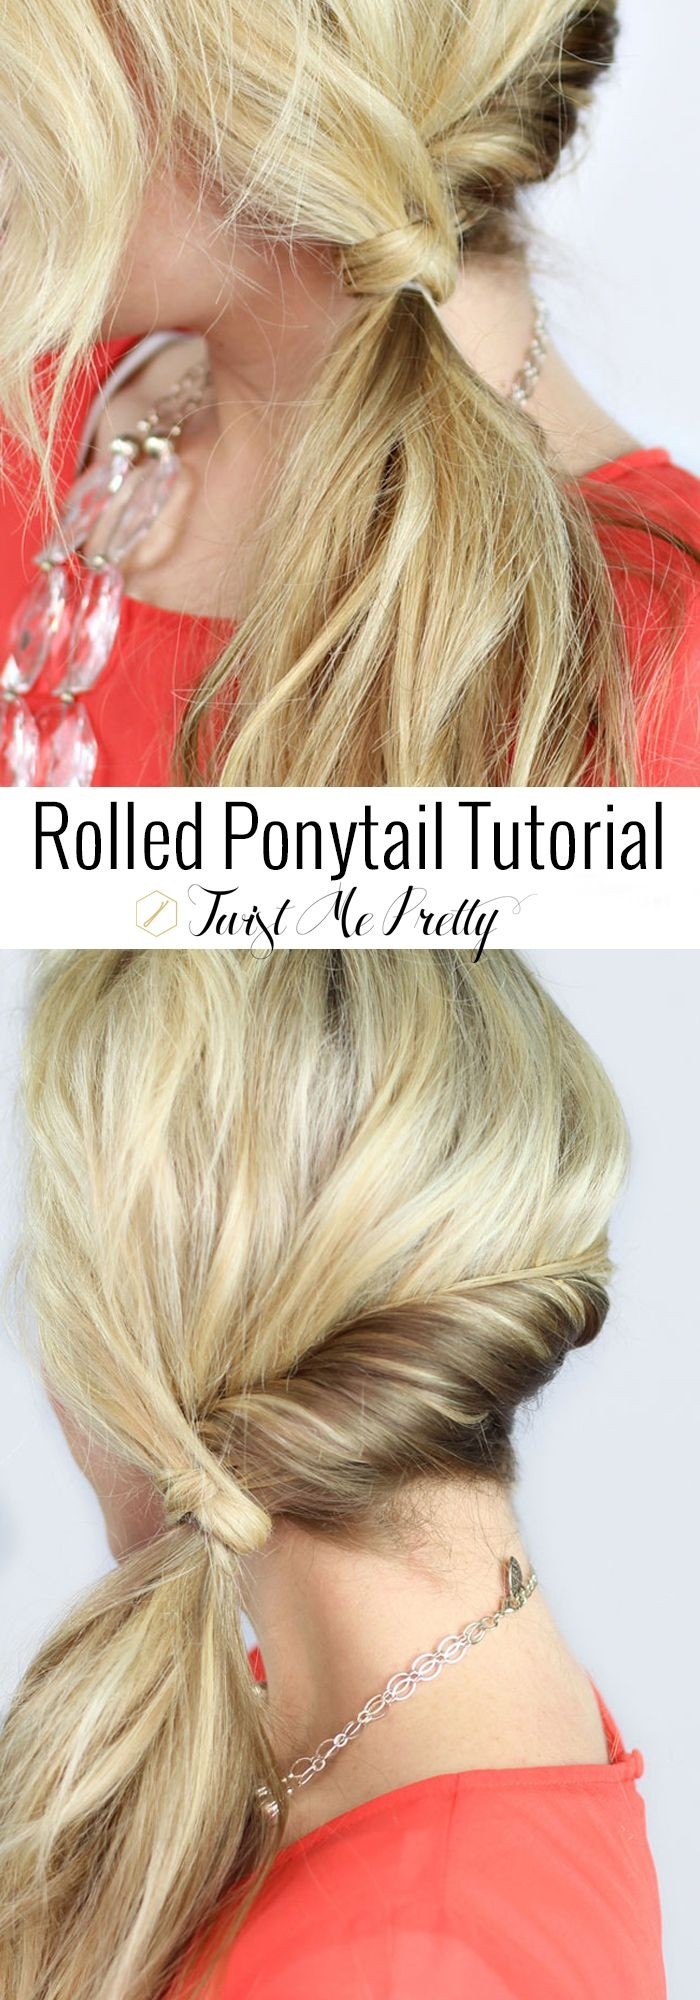 Rolled Ponytail Tutorial: Cute Everyday Hairstyles